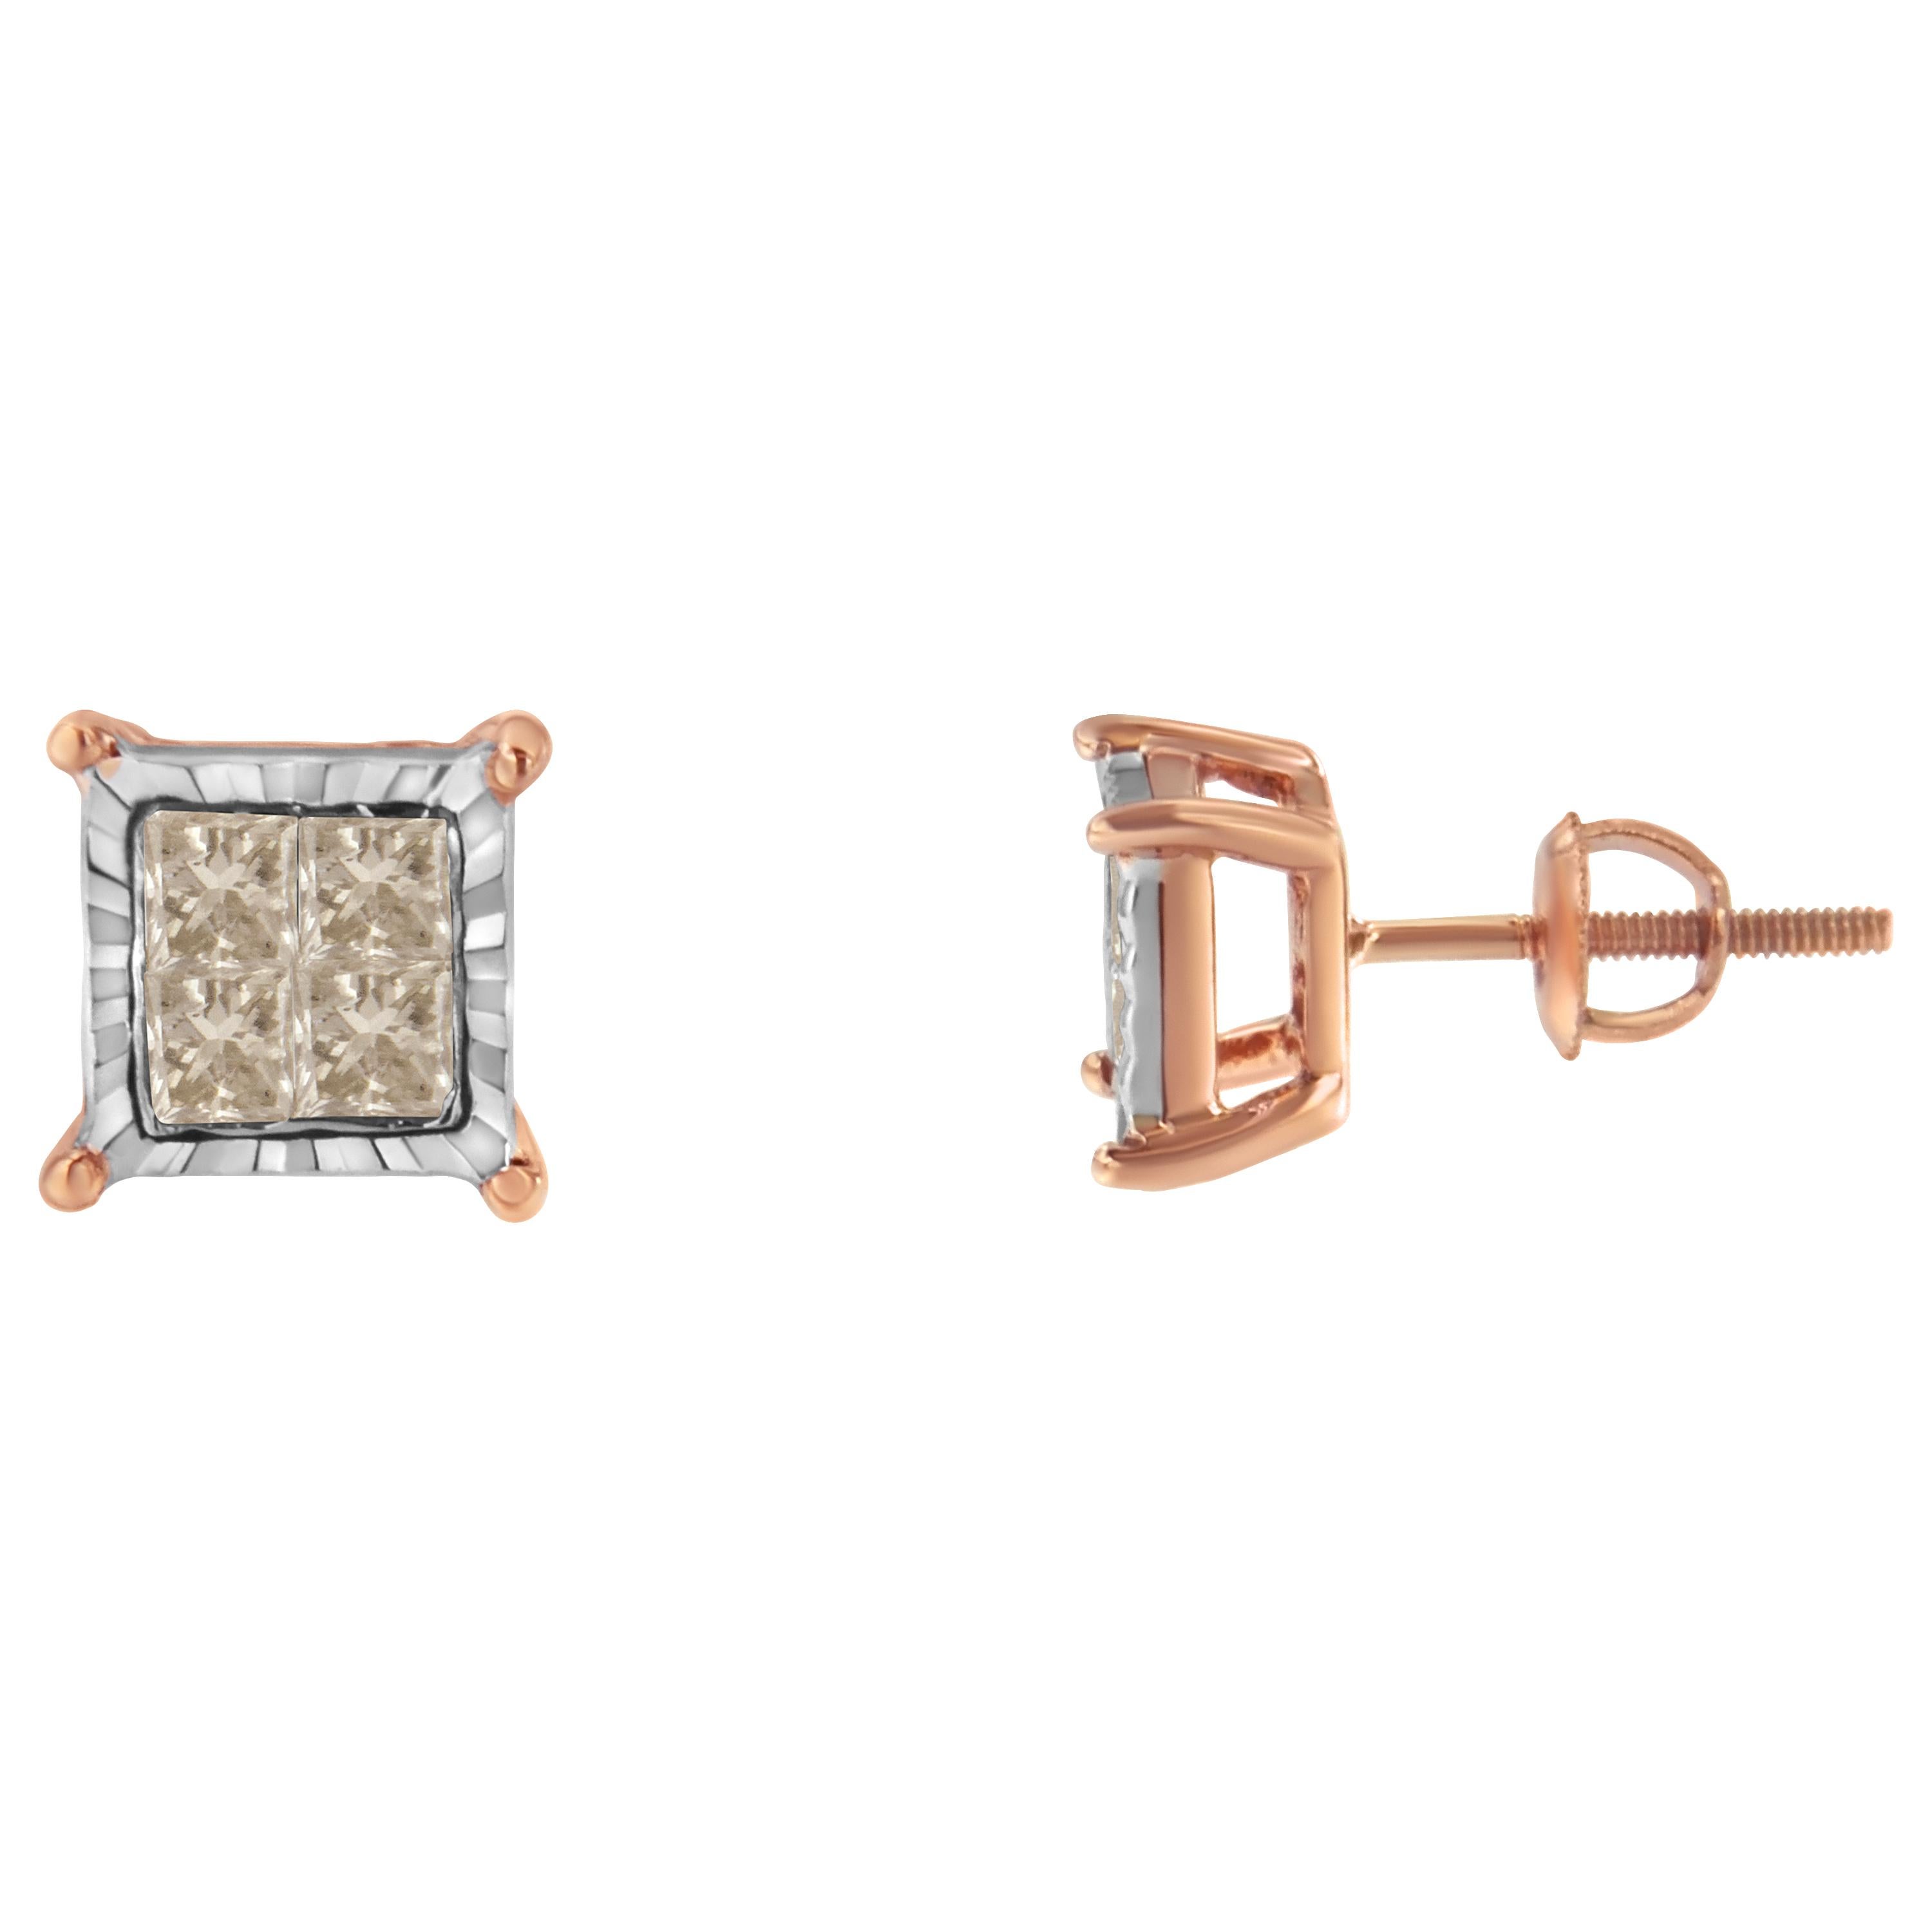 Elegant diamond stud earrings that she'll cherish forever. This classic piece is made in the finest 10k two-toned gold, with rose-gold making up the base and white gold framing the diamonds. Four princess-cut diamonds in a miracle setting are set in